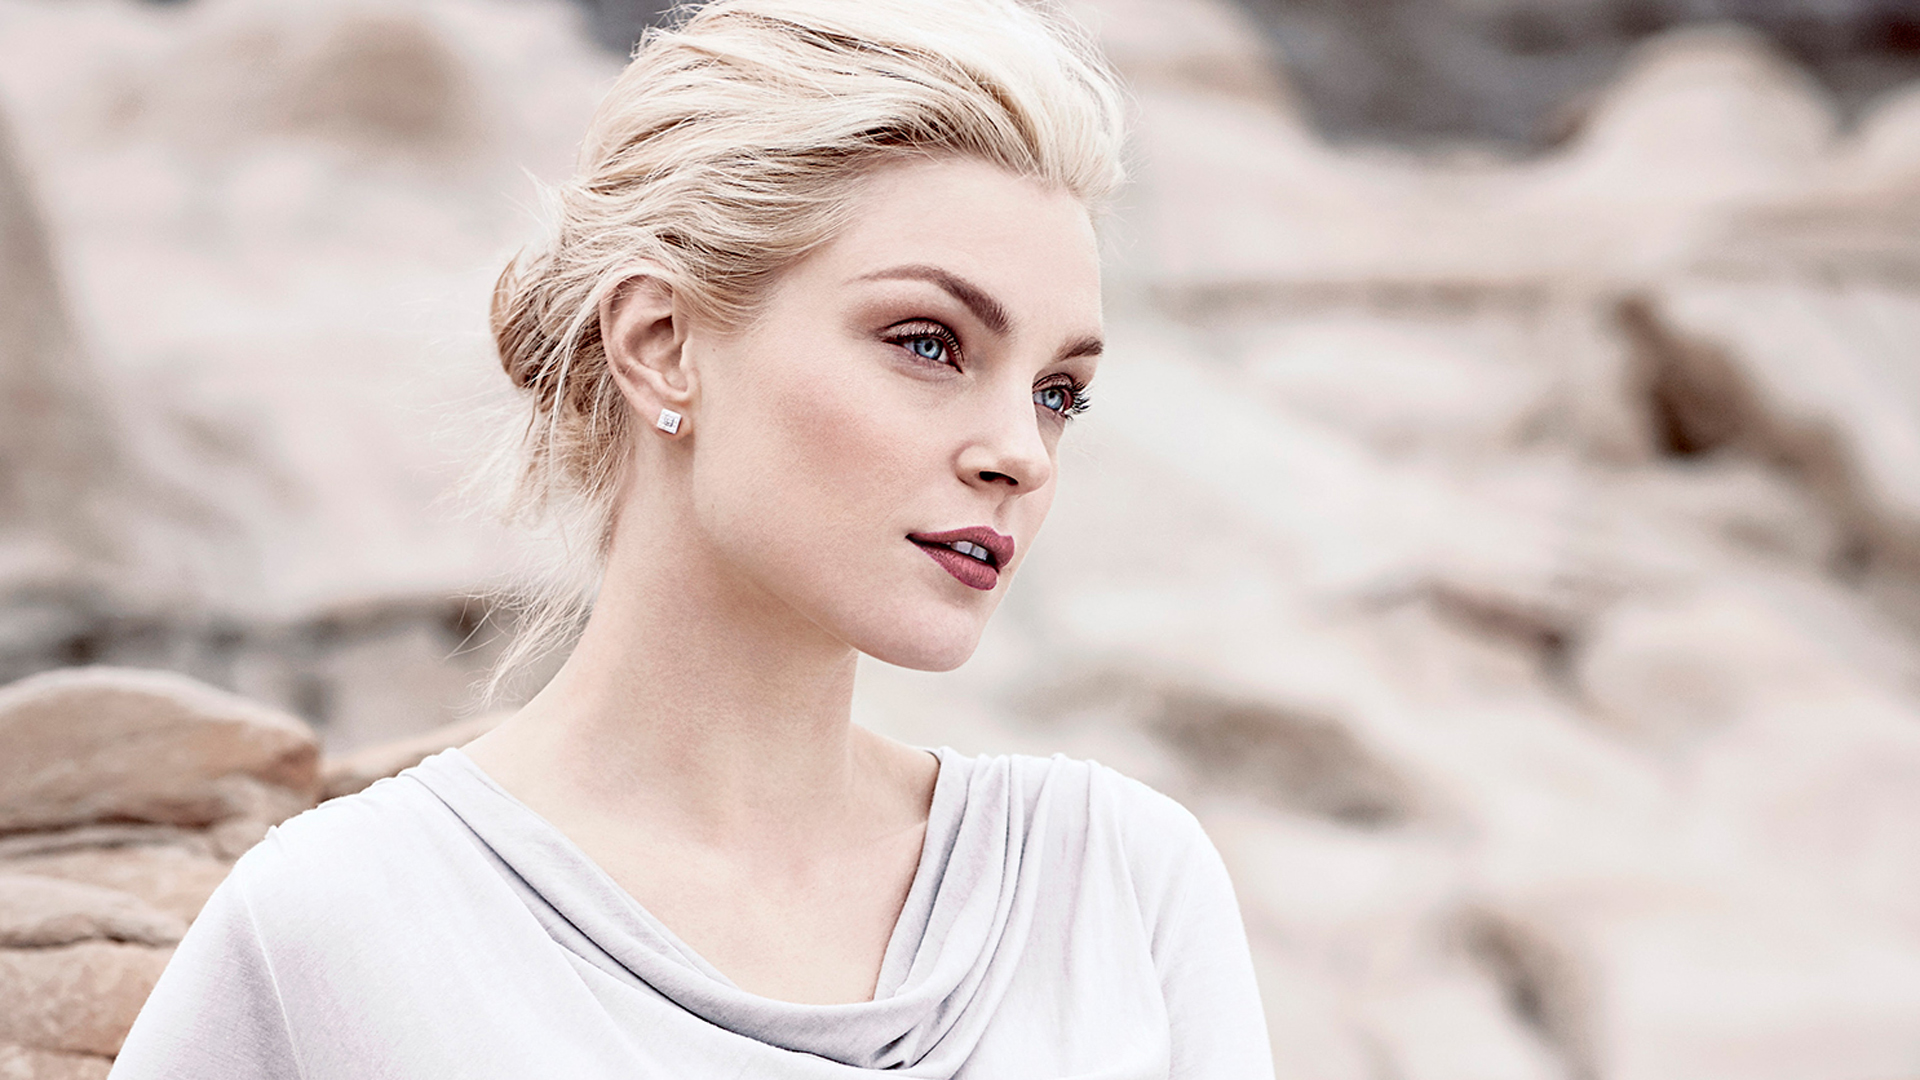 Jessica Stam HD Wallpaper Background Of Your Choice